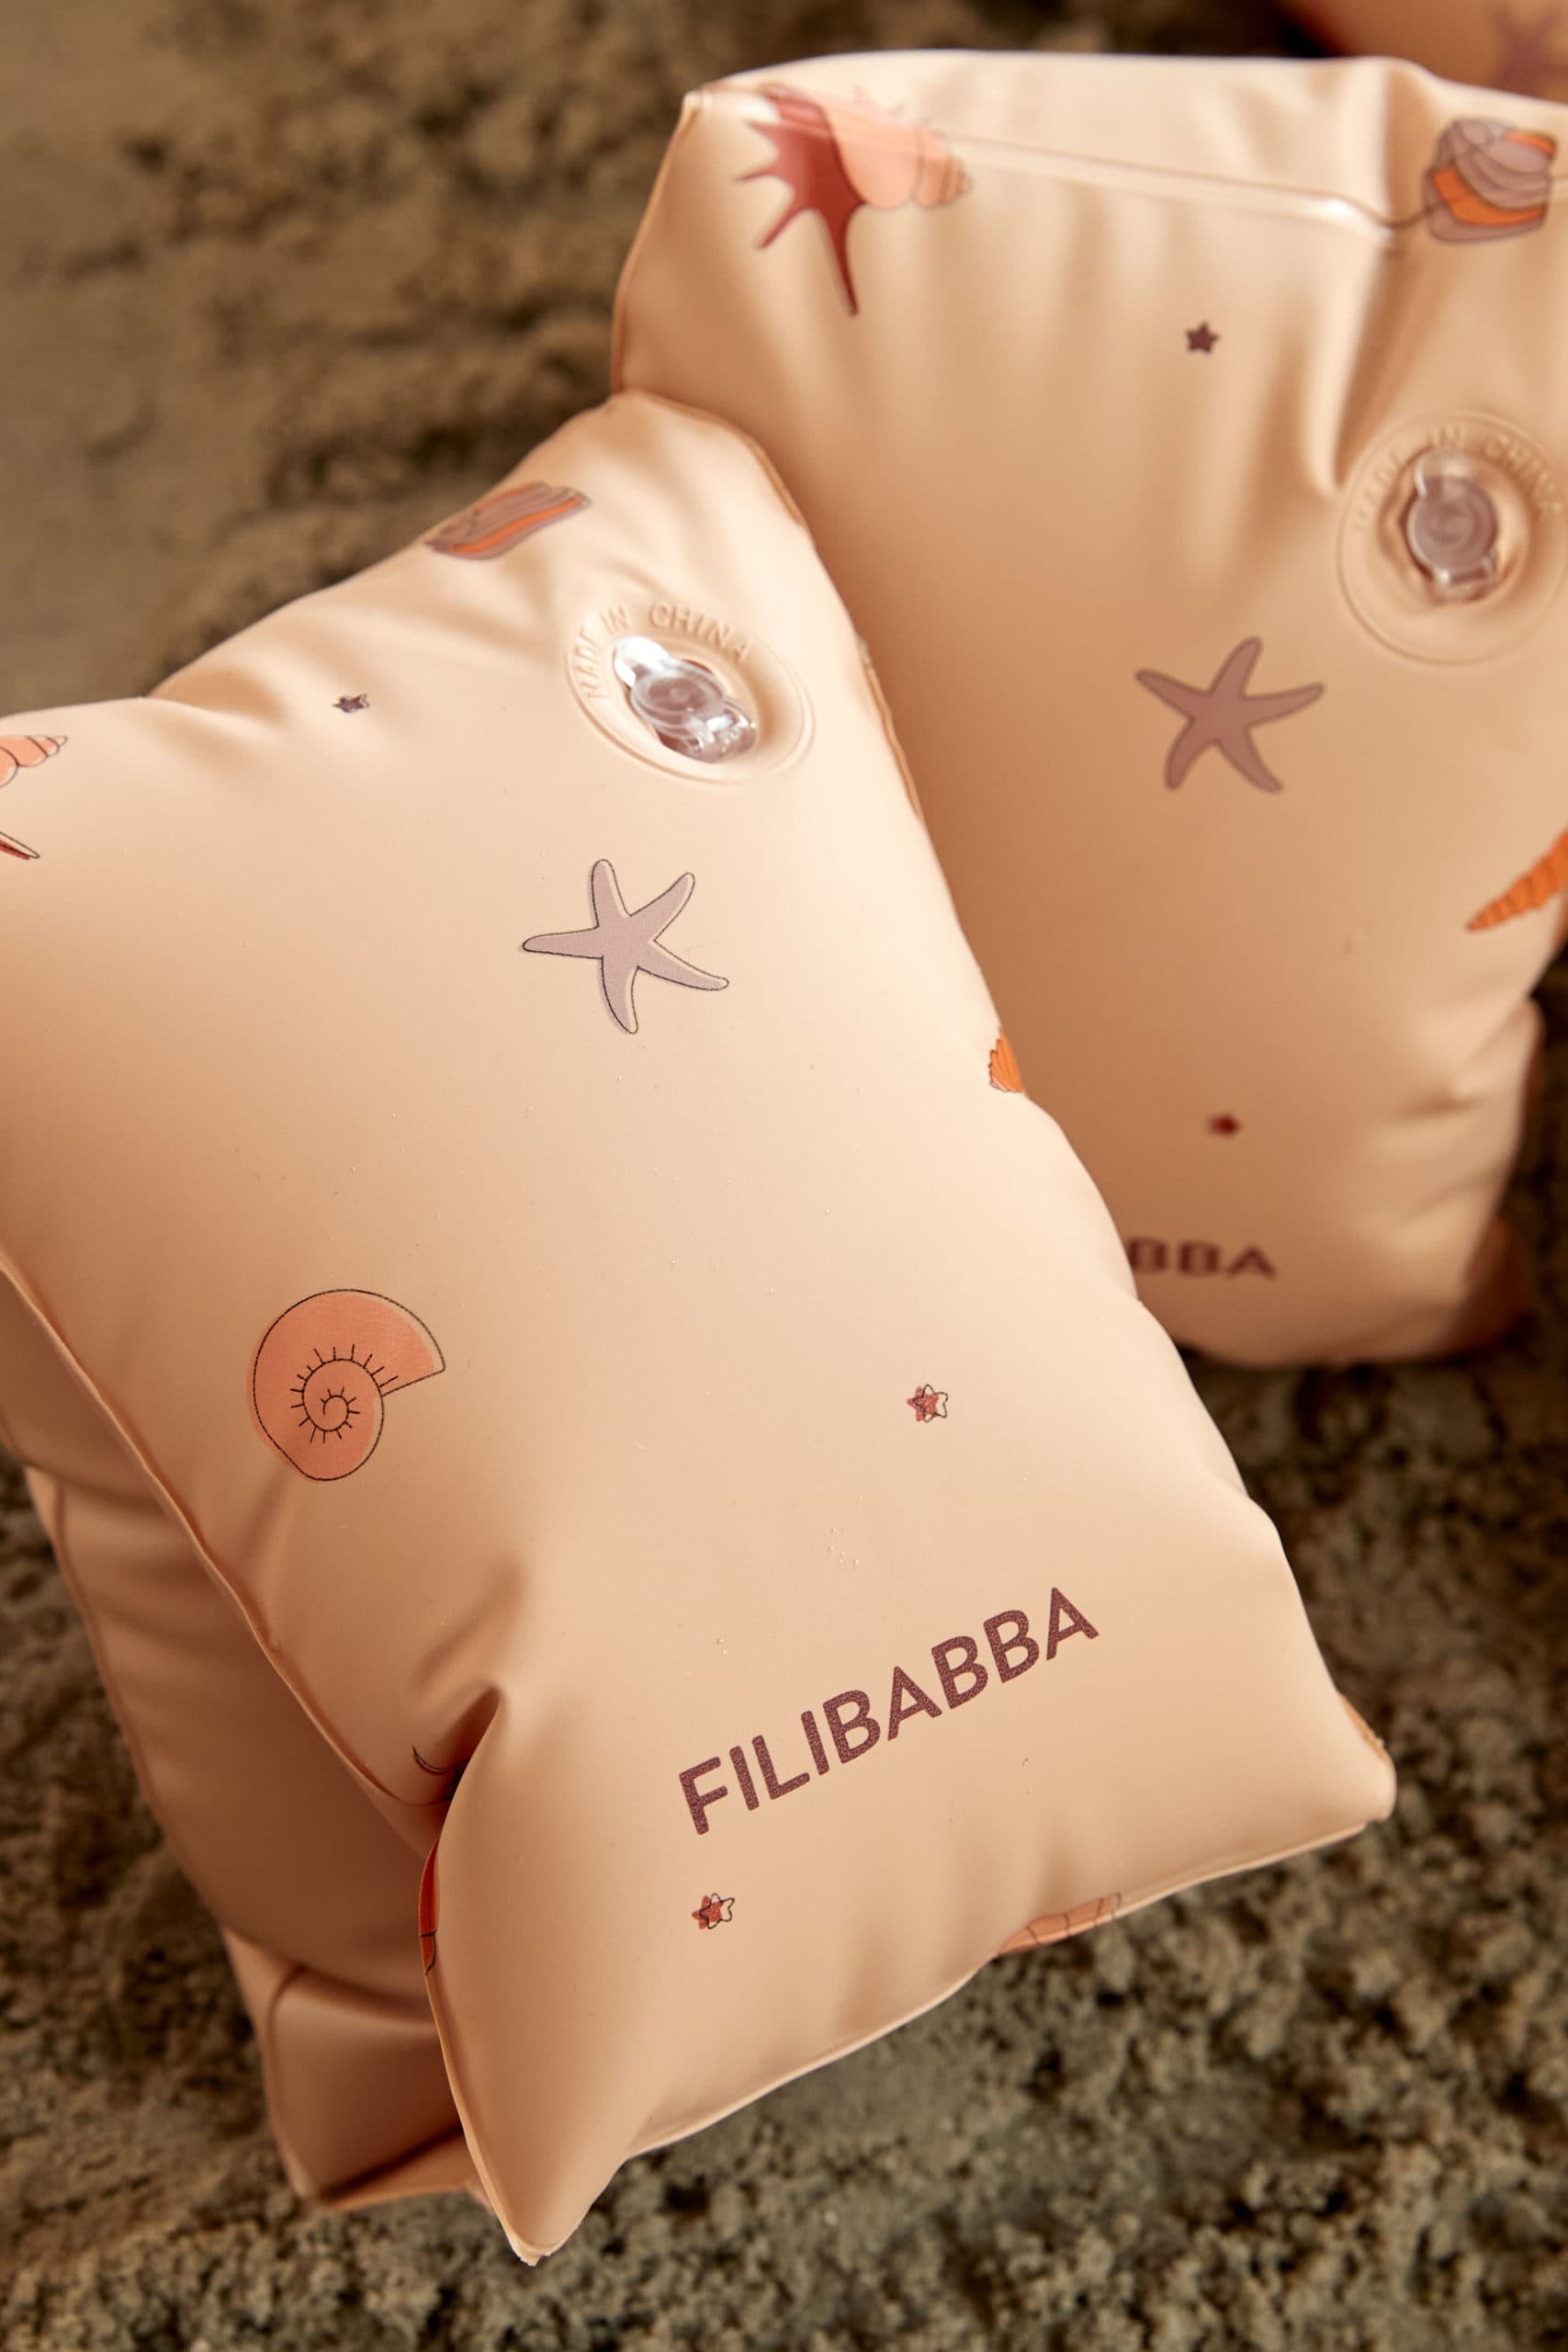 Filibabba Bath wings(Collection of Memories)